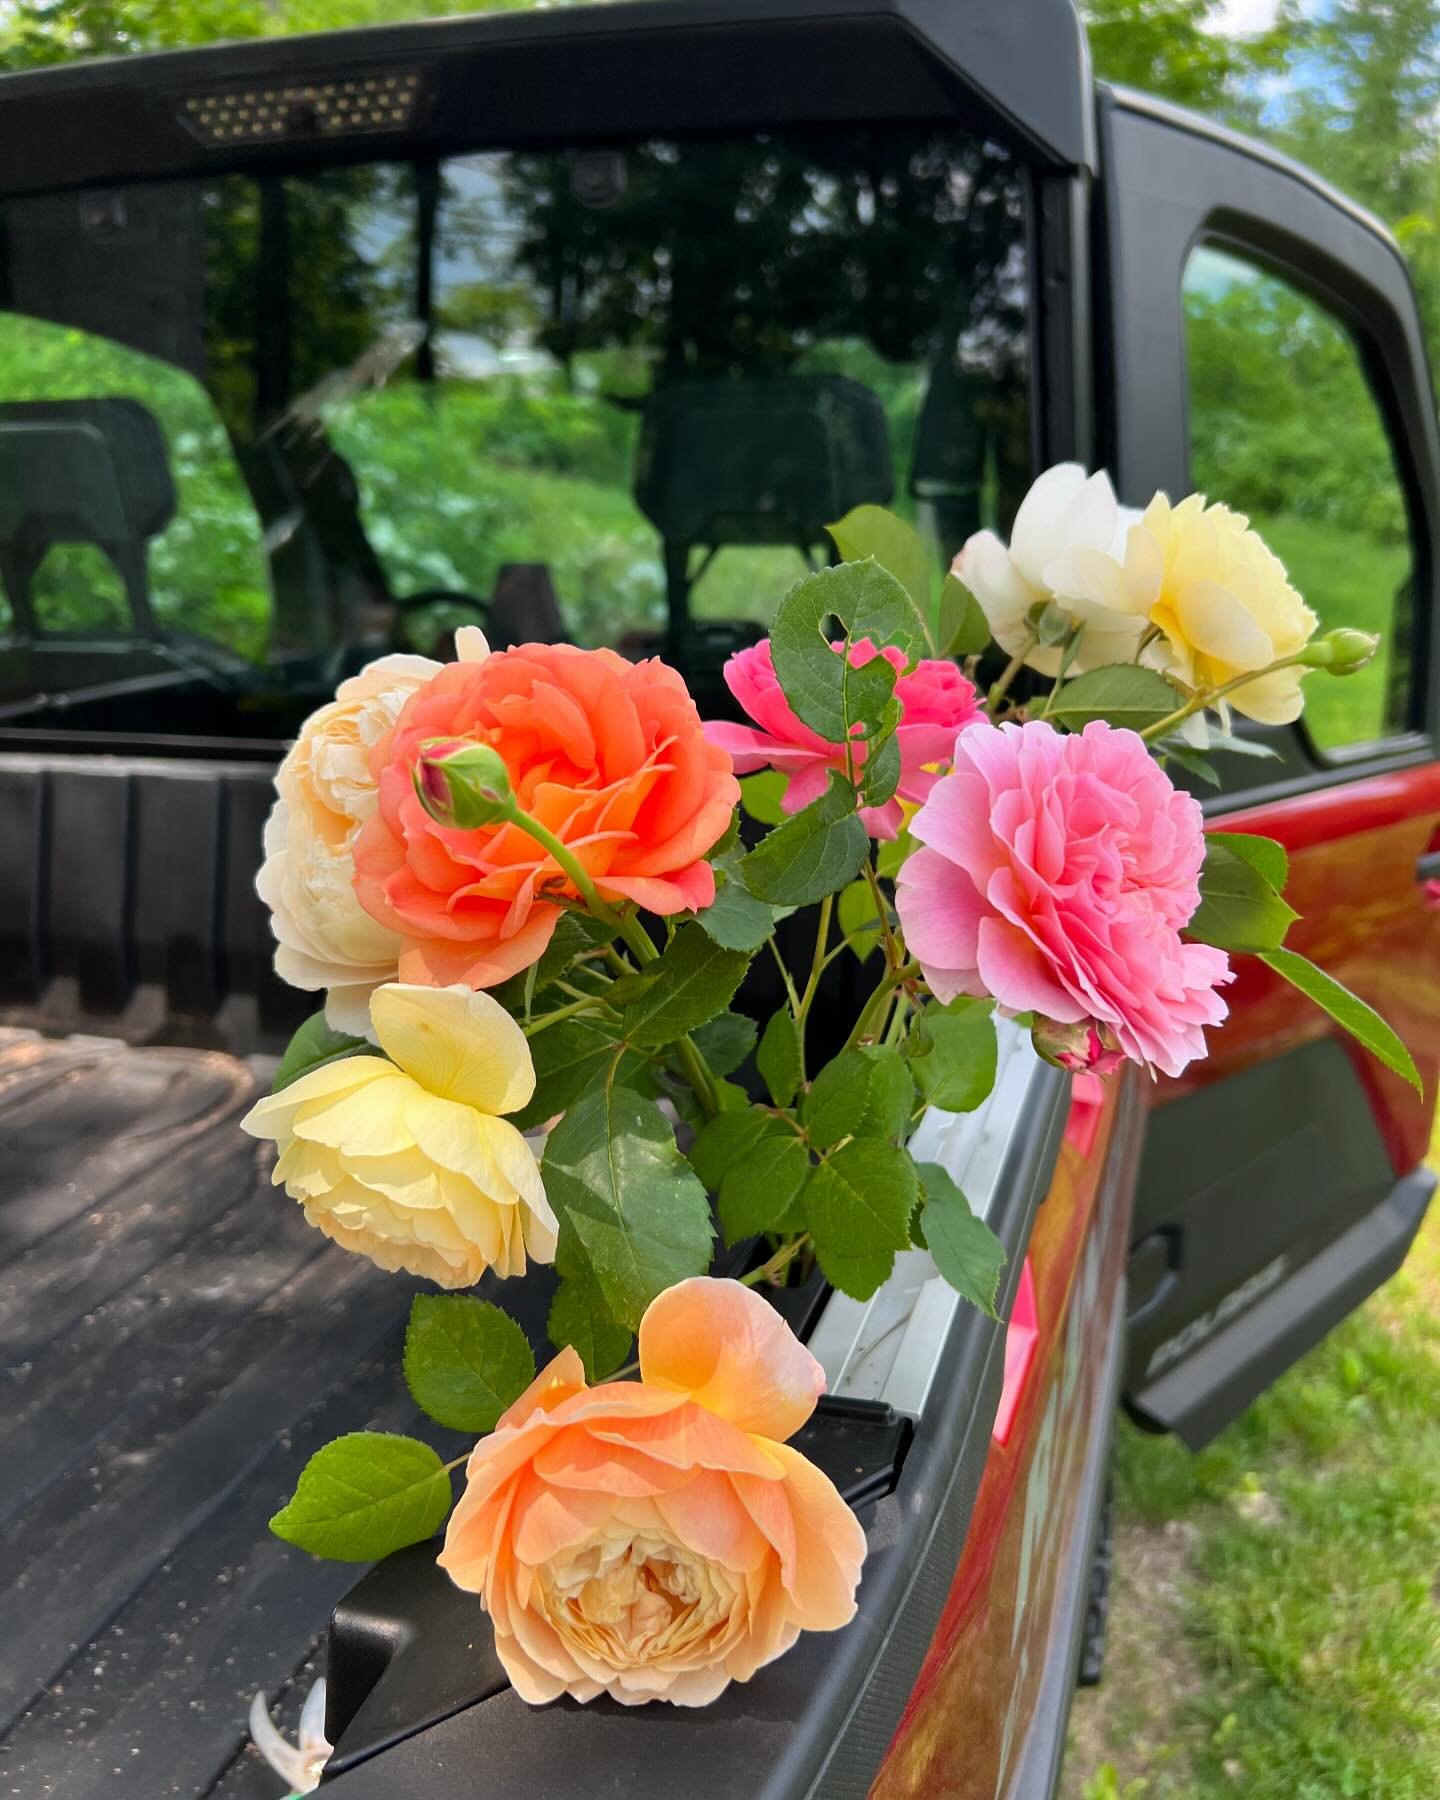 Oh, the garden roses are a- bloomin! 

We gasp every time we step into the field- they are just over the top beautiful.

Bringing you some rose bouquets next week! And a pop up workshop is in the works! Excited to share these beauties with you!

#ele